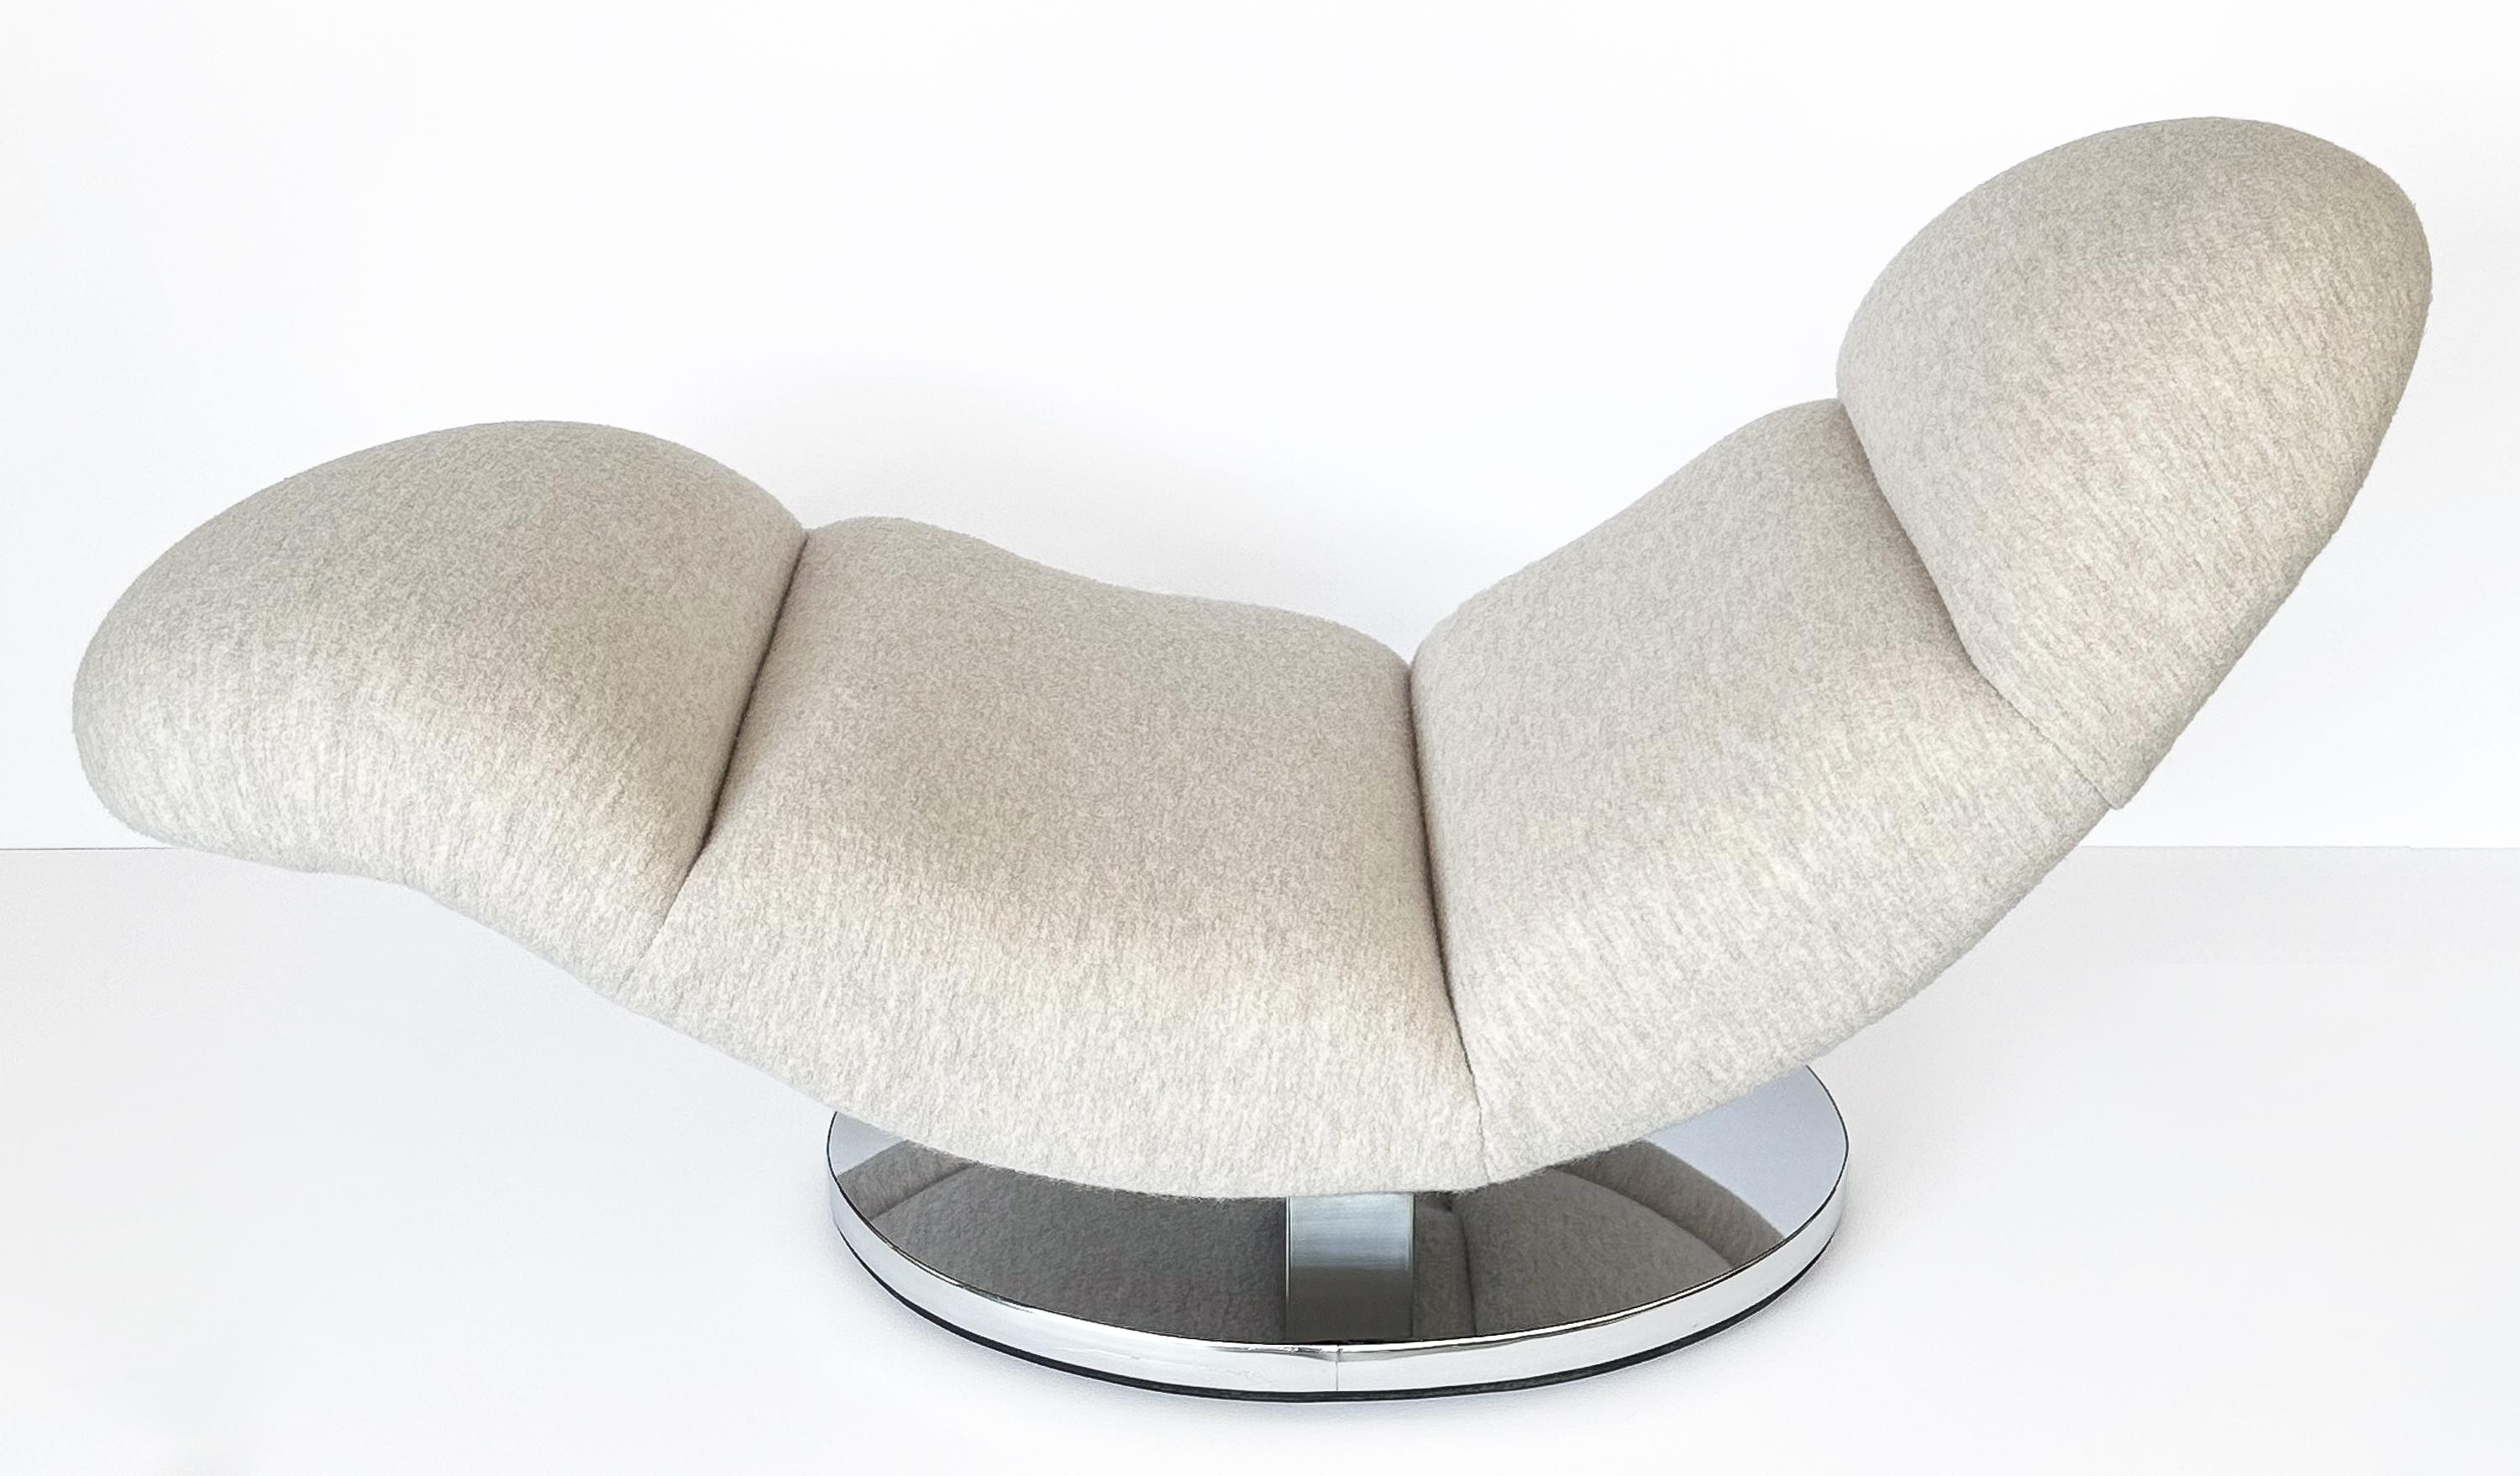 Step into the world of luxury with this stunning Milo Baughman rocking wave chaise lounge, created for Thayer Coggin in the 1970s. This isn't just a chaise lounge; it's an epitome of comfort blended with sheer elegance. The sculptural, curvaceous